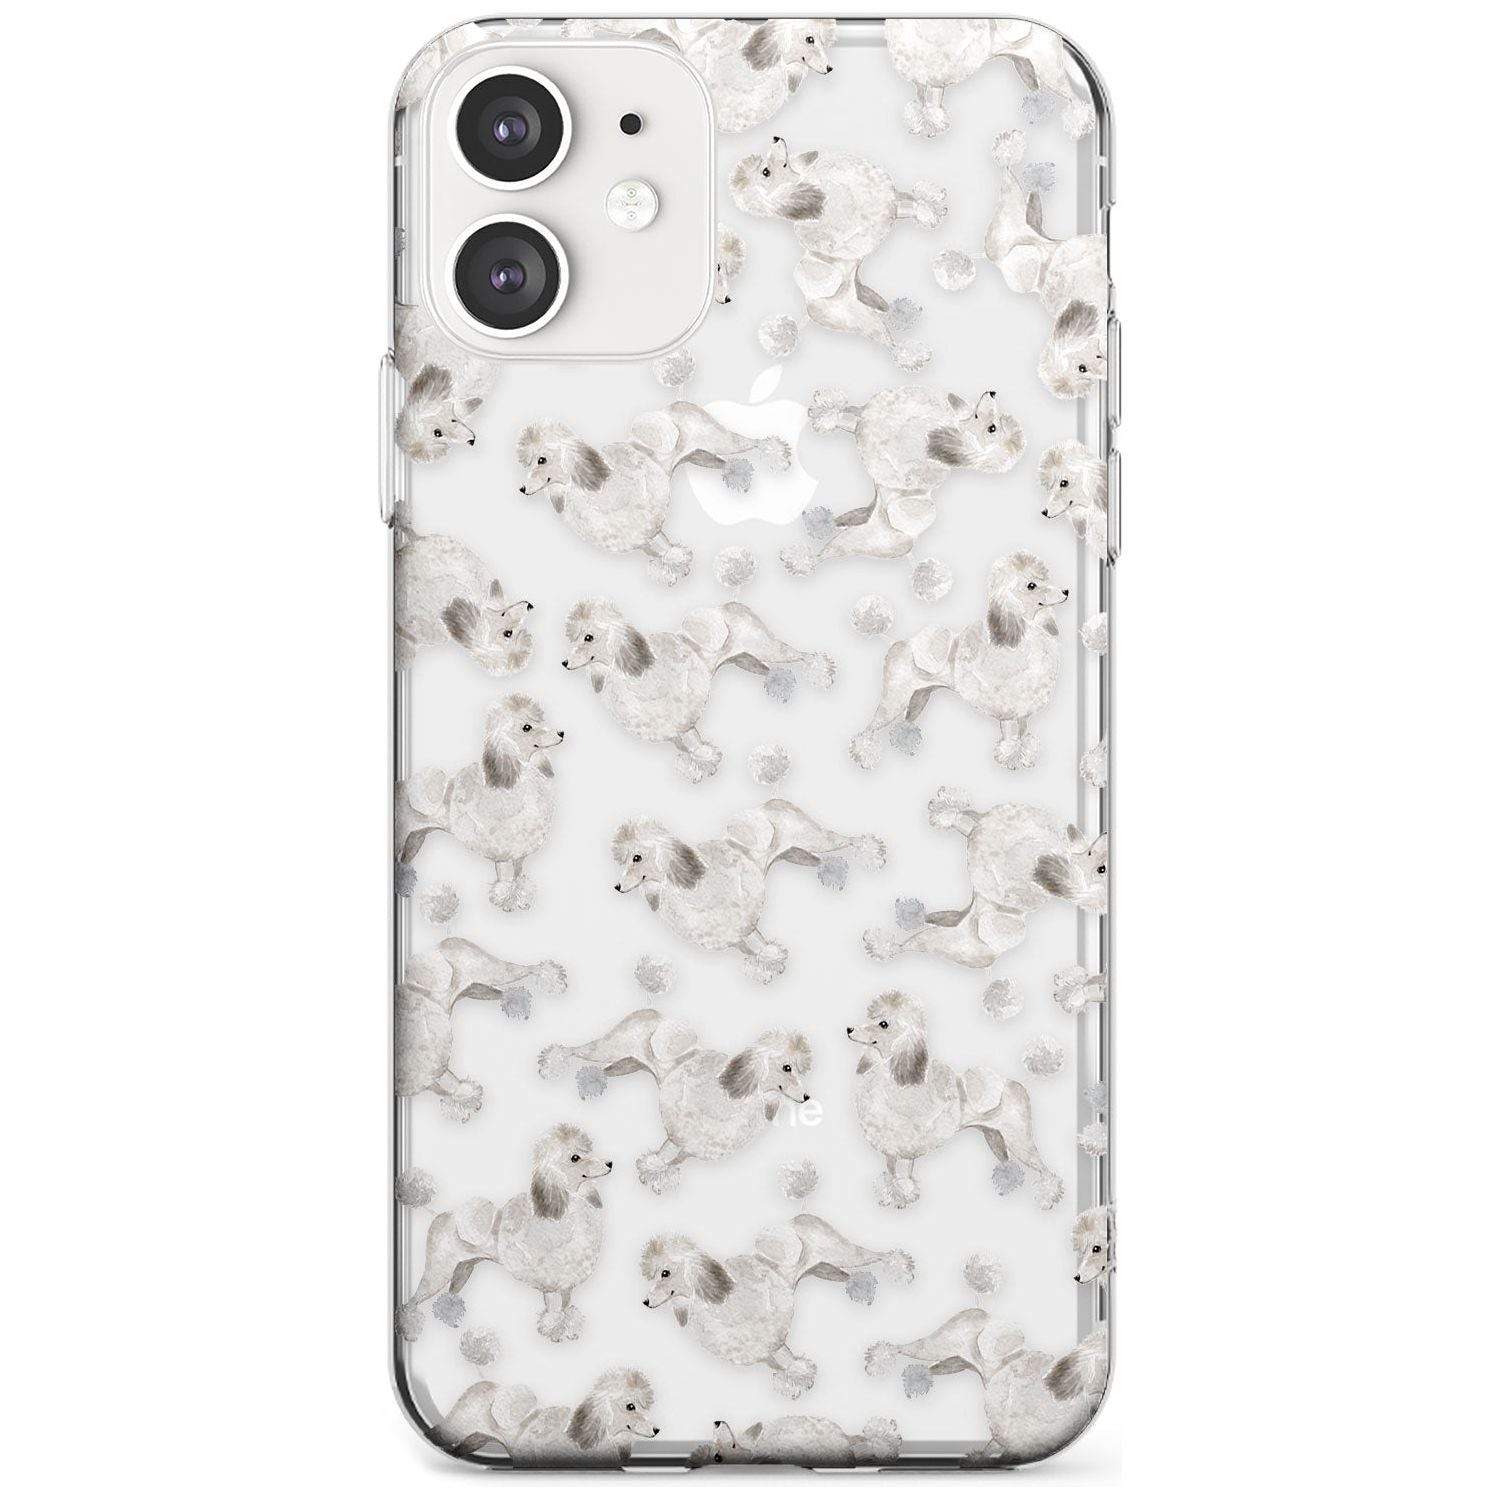 Poodle (White) Watercolour Dog Pattern Slim TPU Phone Case for iPhone 11